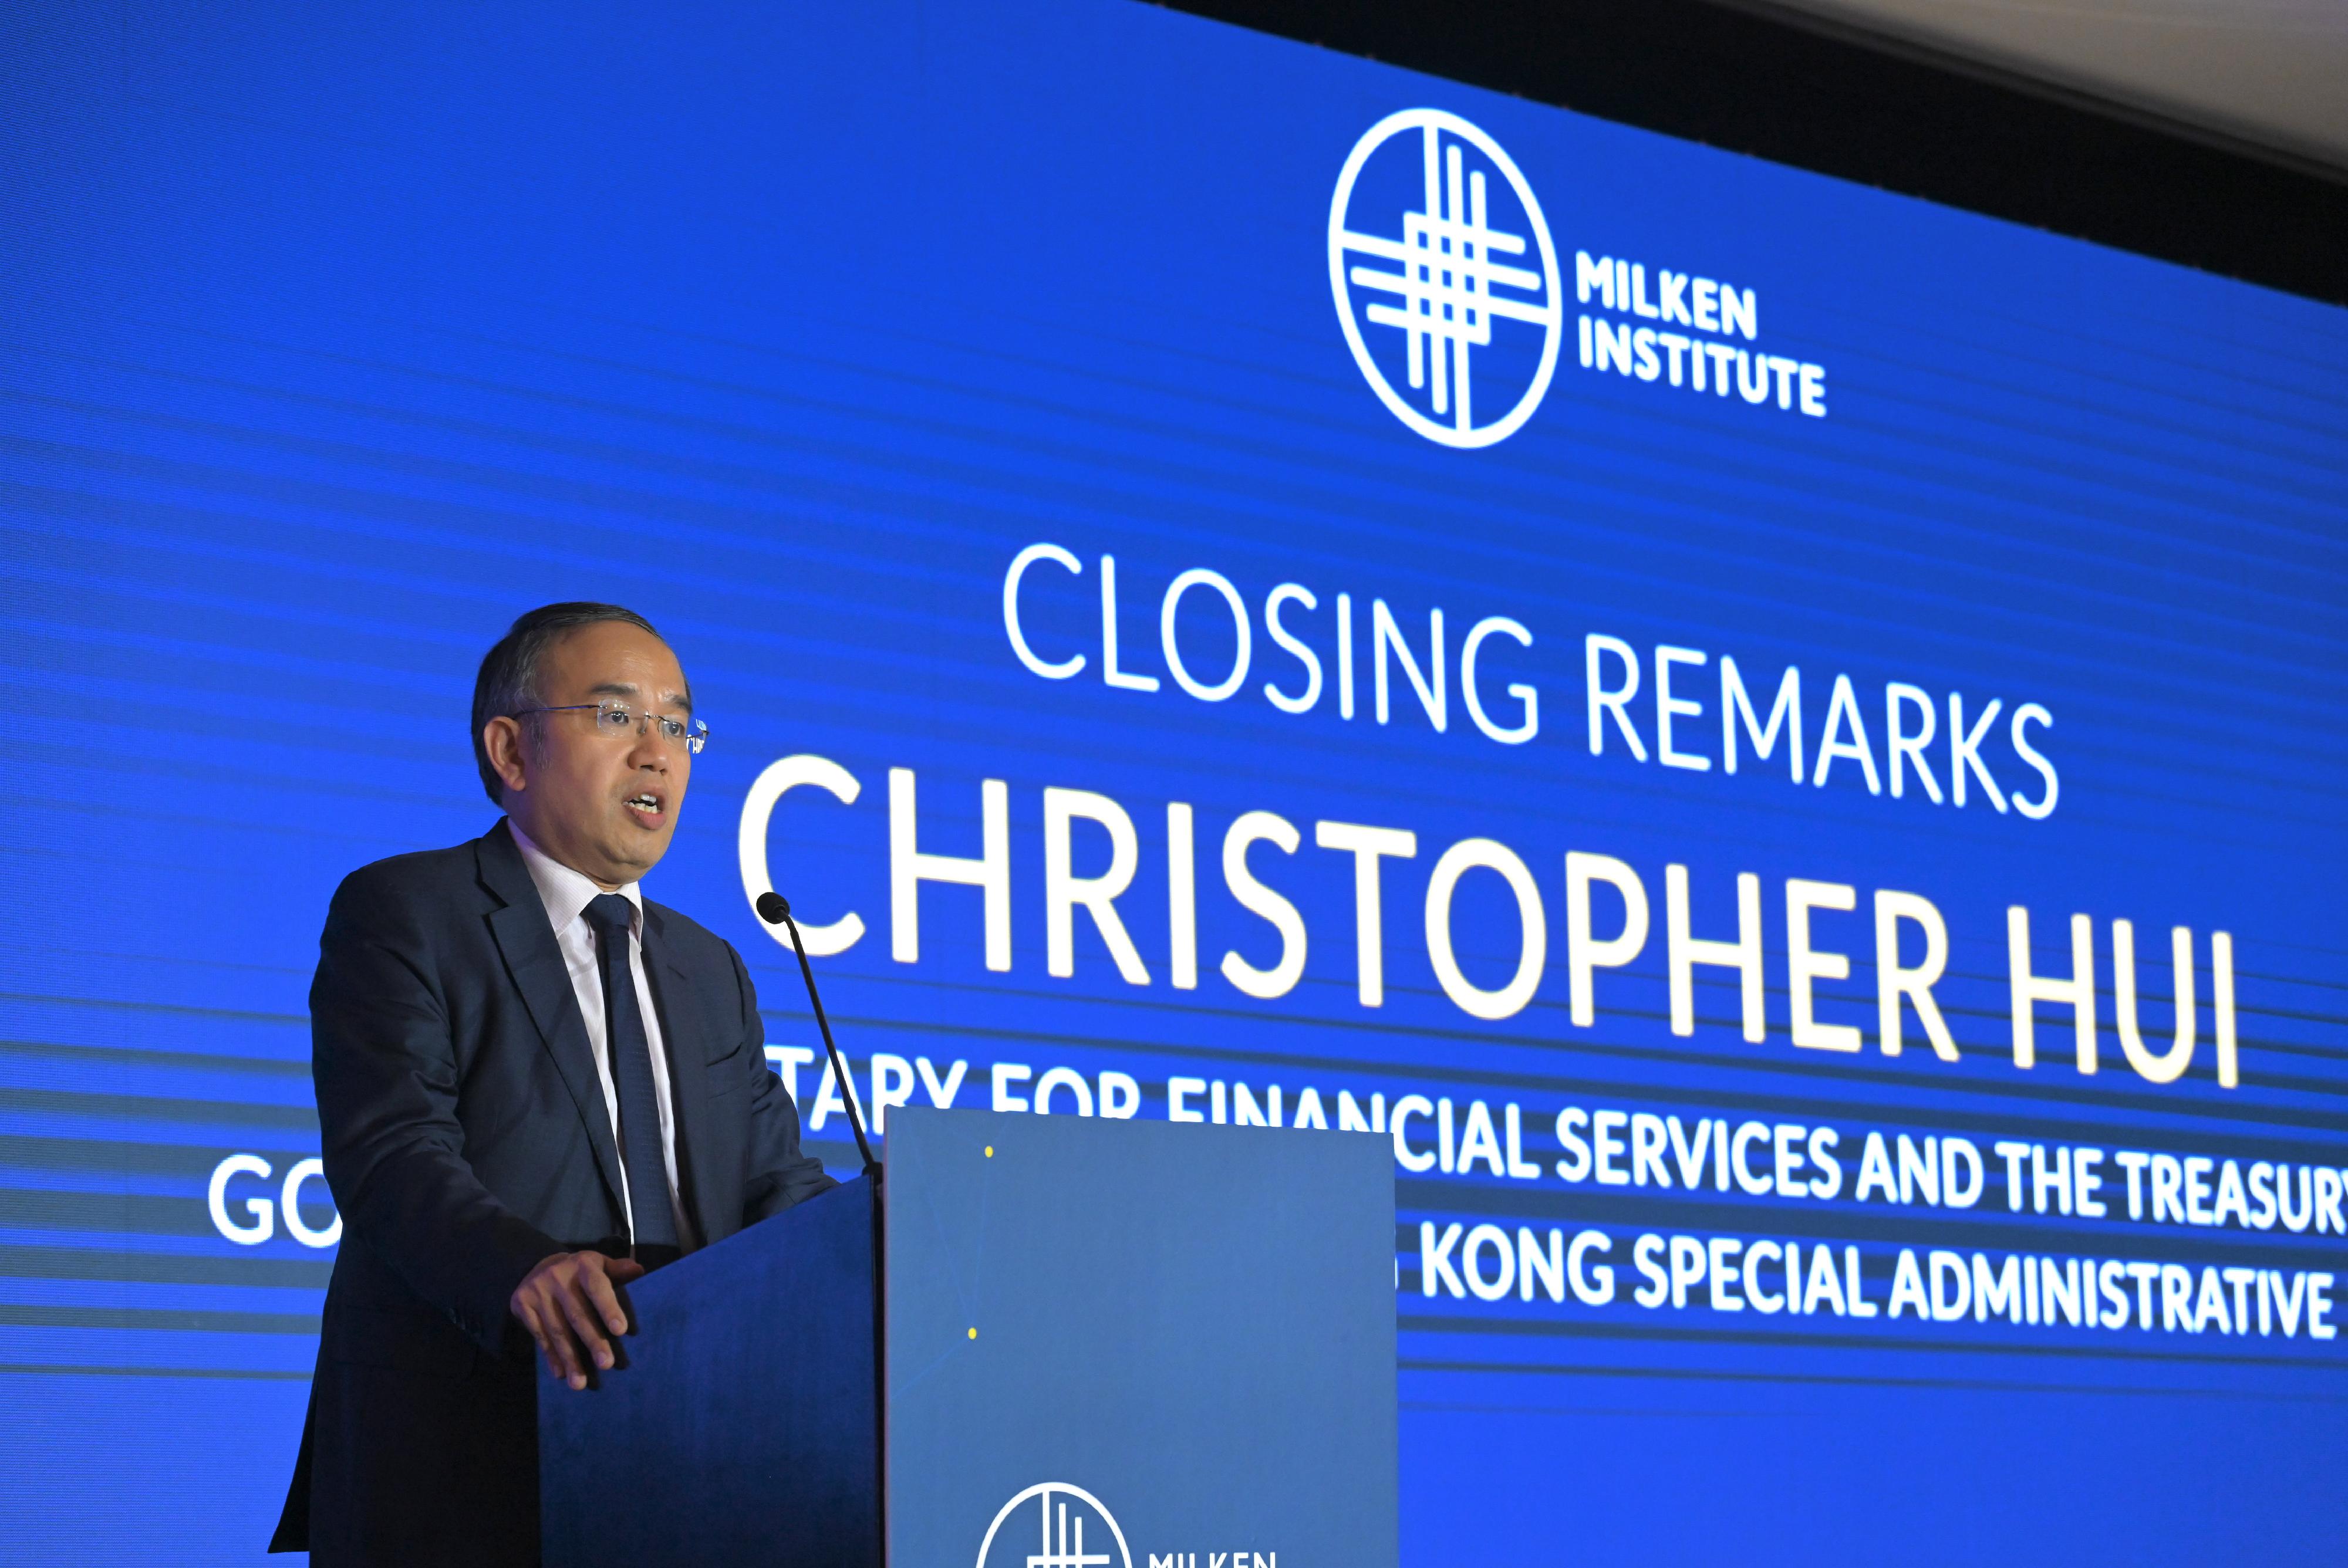 The Secretary for Financial Services and the Treasury, Mr Christopher Hui, delivers closing remarks at the Milken Institute's Global Investors' Symposium today (March 26).